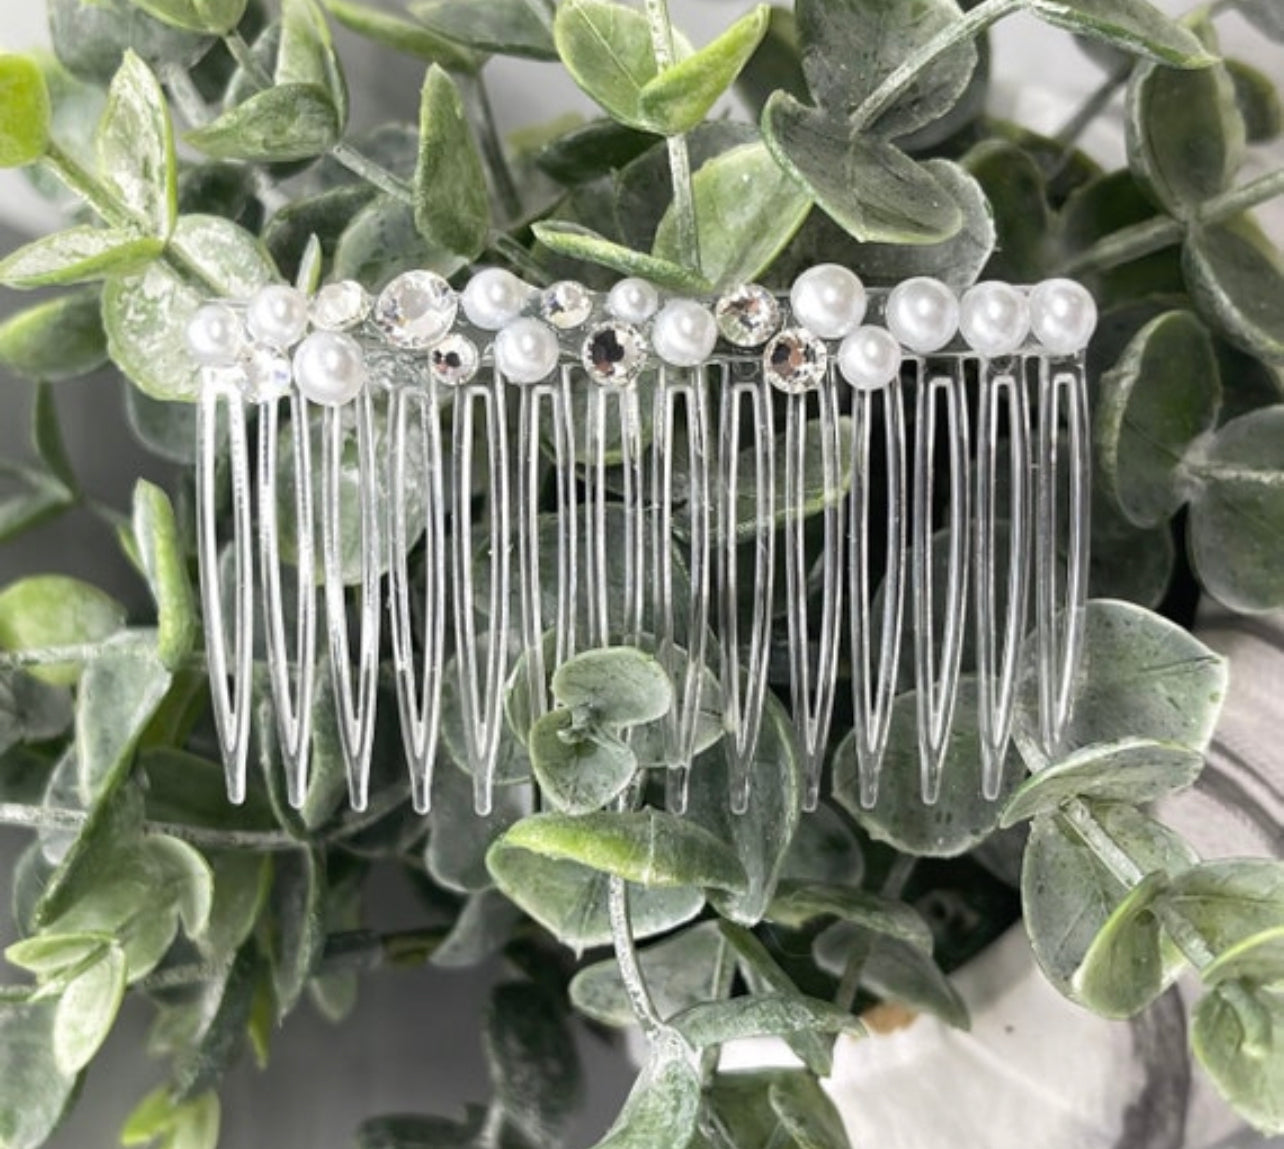 White bridal crystal Rhinestone Pearl hair comb accessory side Comb 3.5” clear plastic side Comb #008